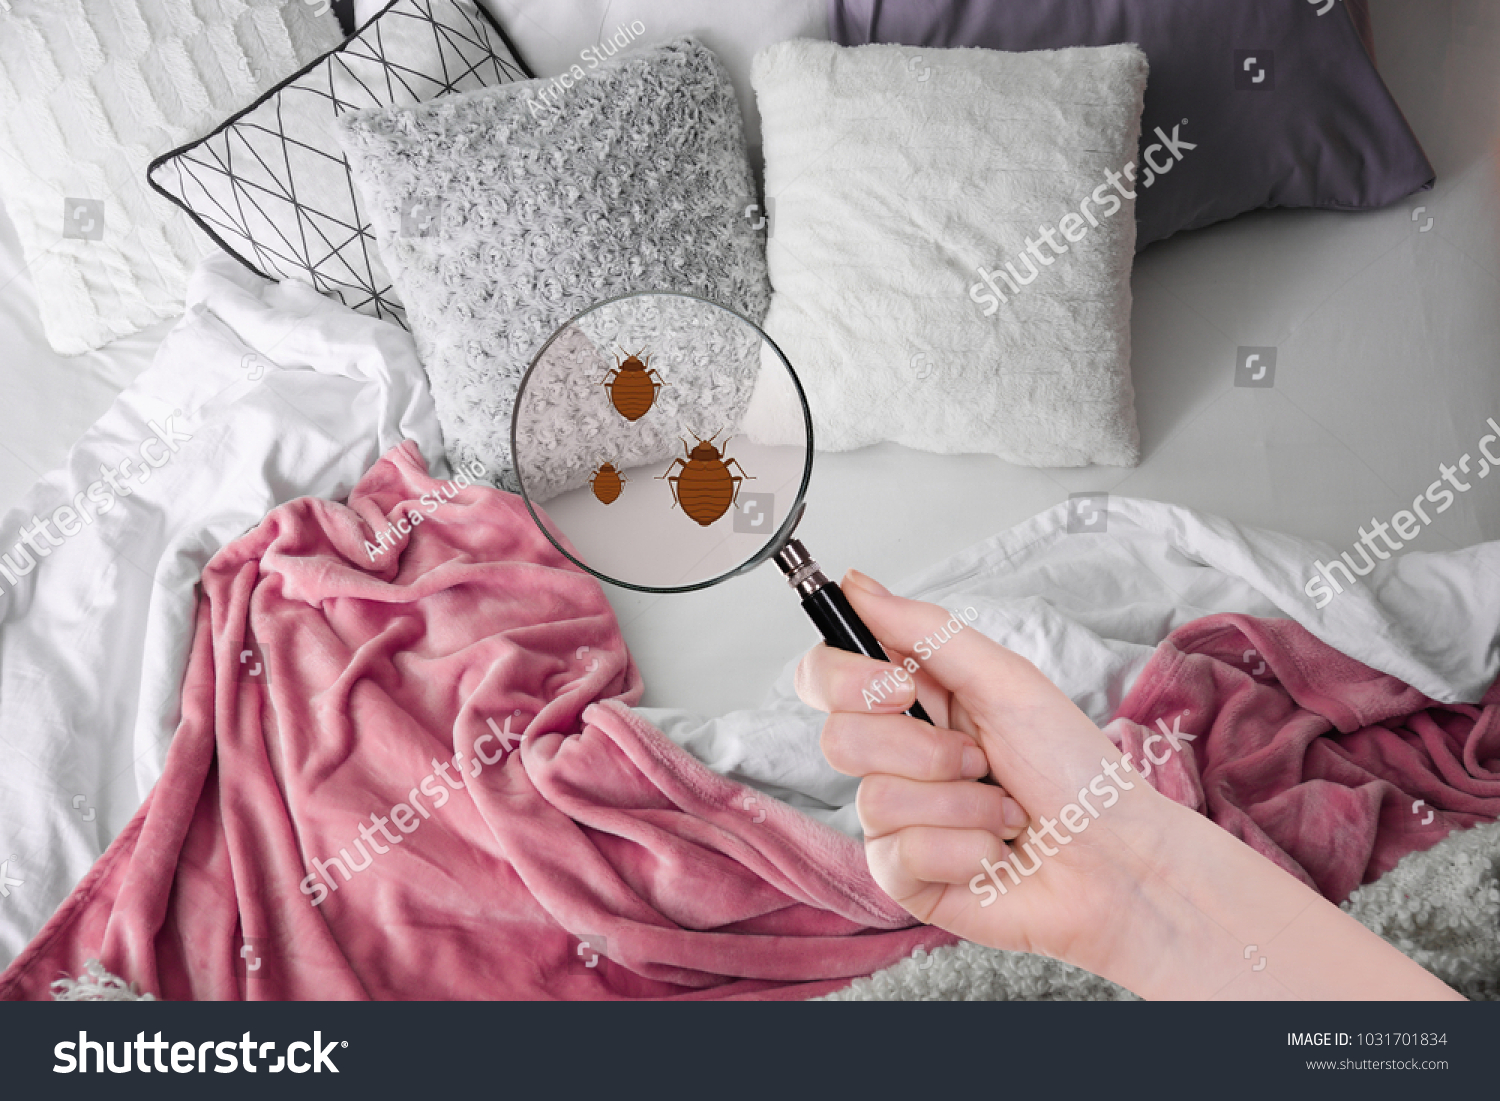 Woman with magnifying glass detecting bed bugs in bedroom #1031701834